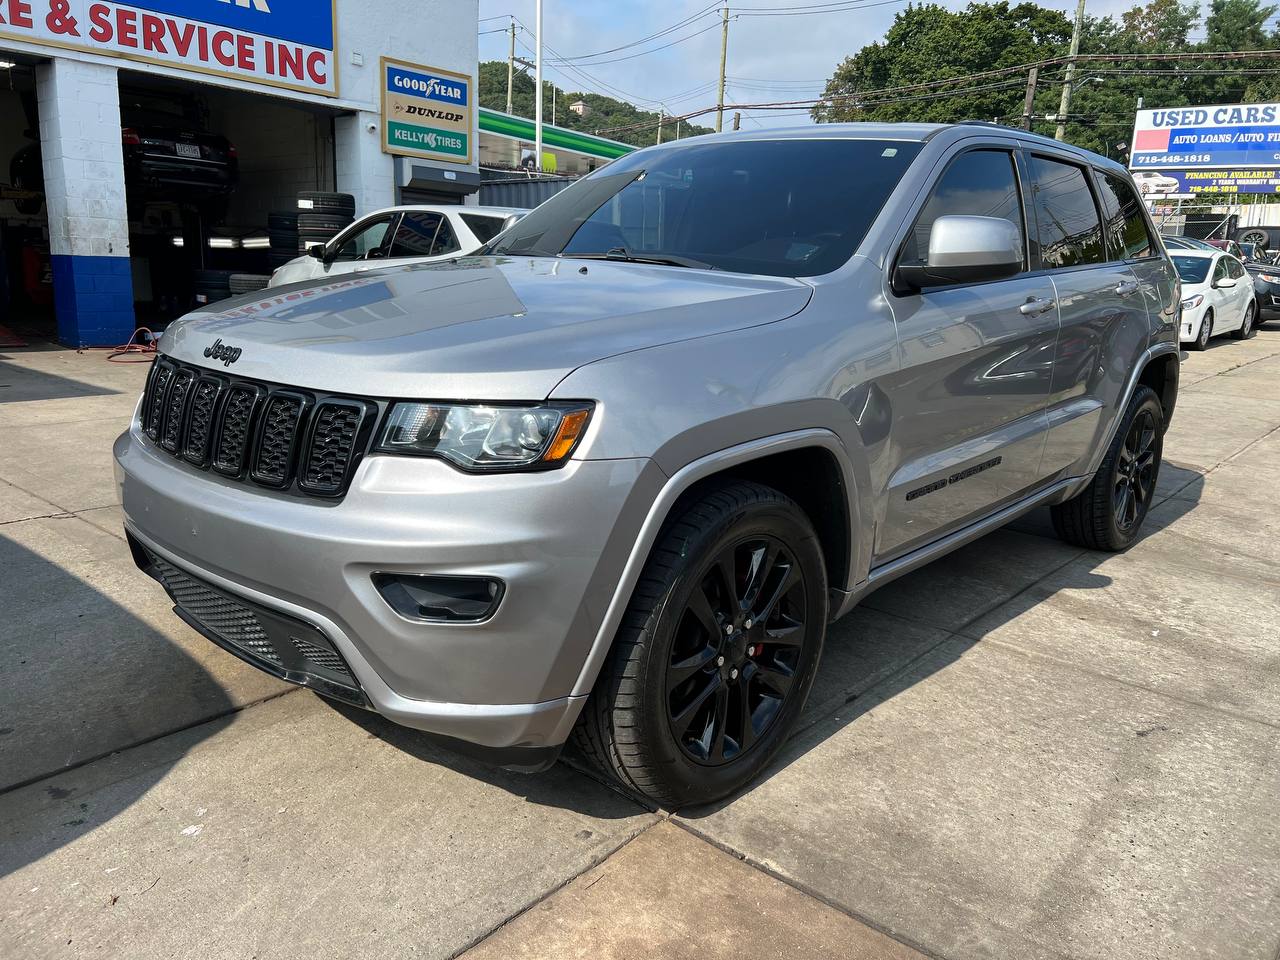 Used Car - 2018 Jeep Grand Cherokee Altitude for Sale in Staten Island, NY